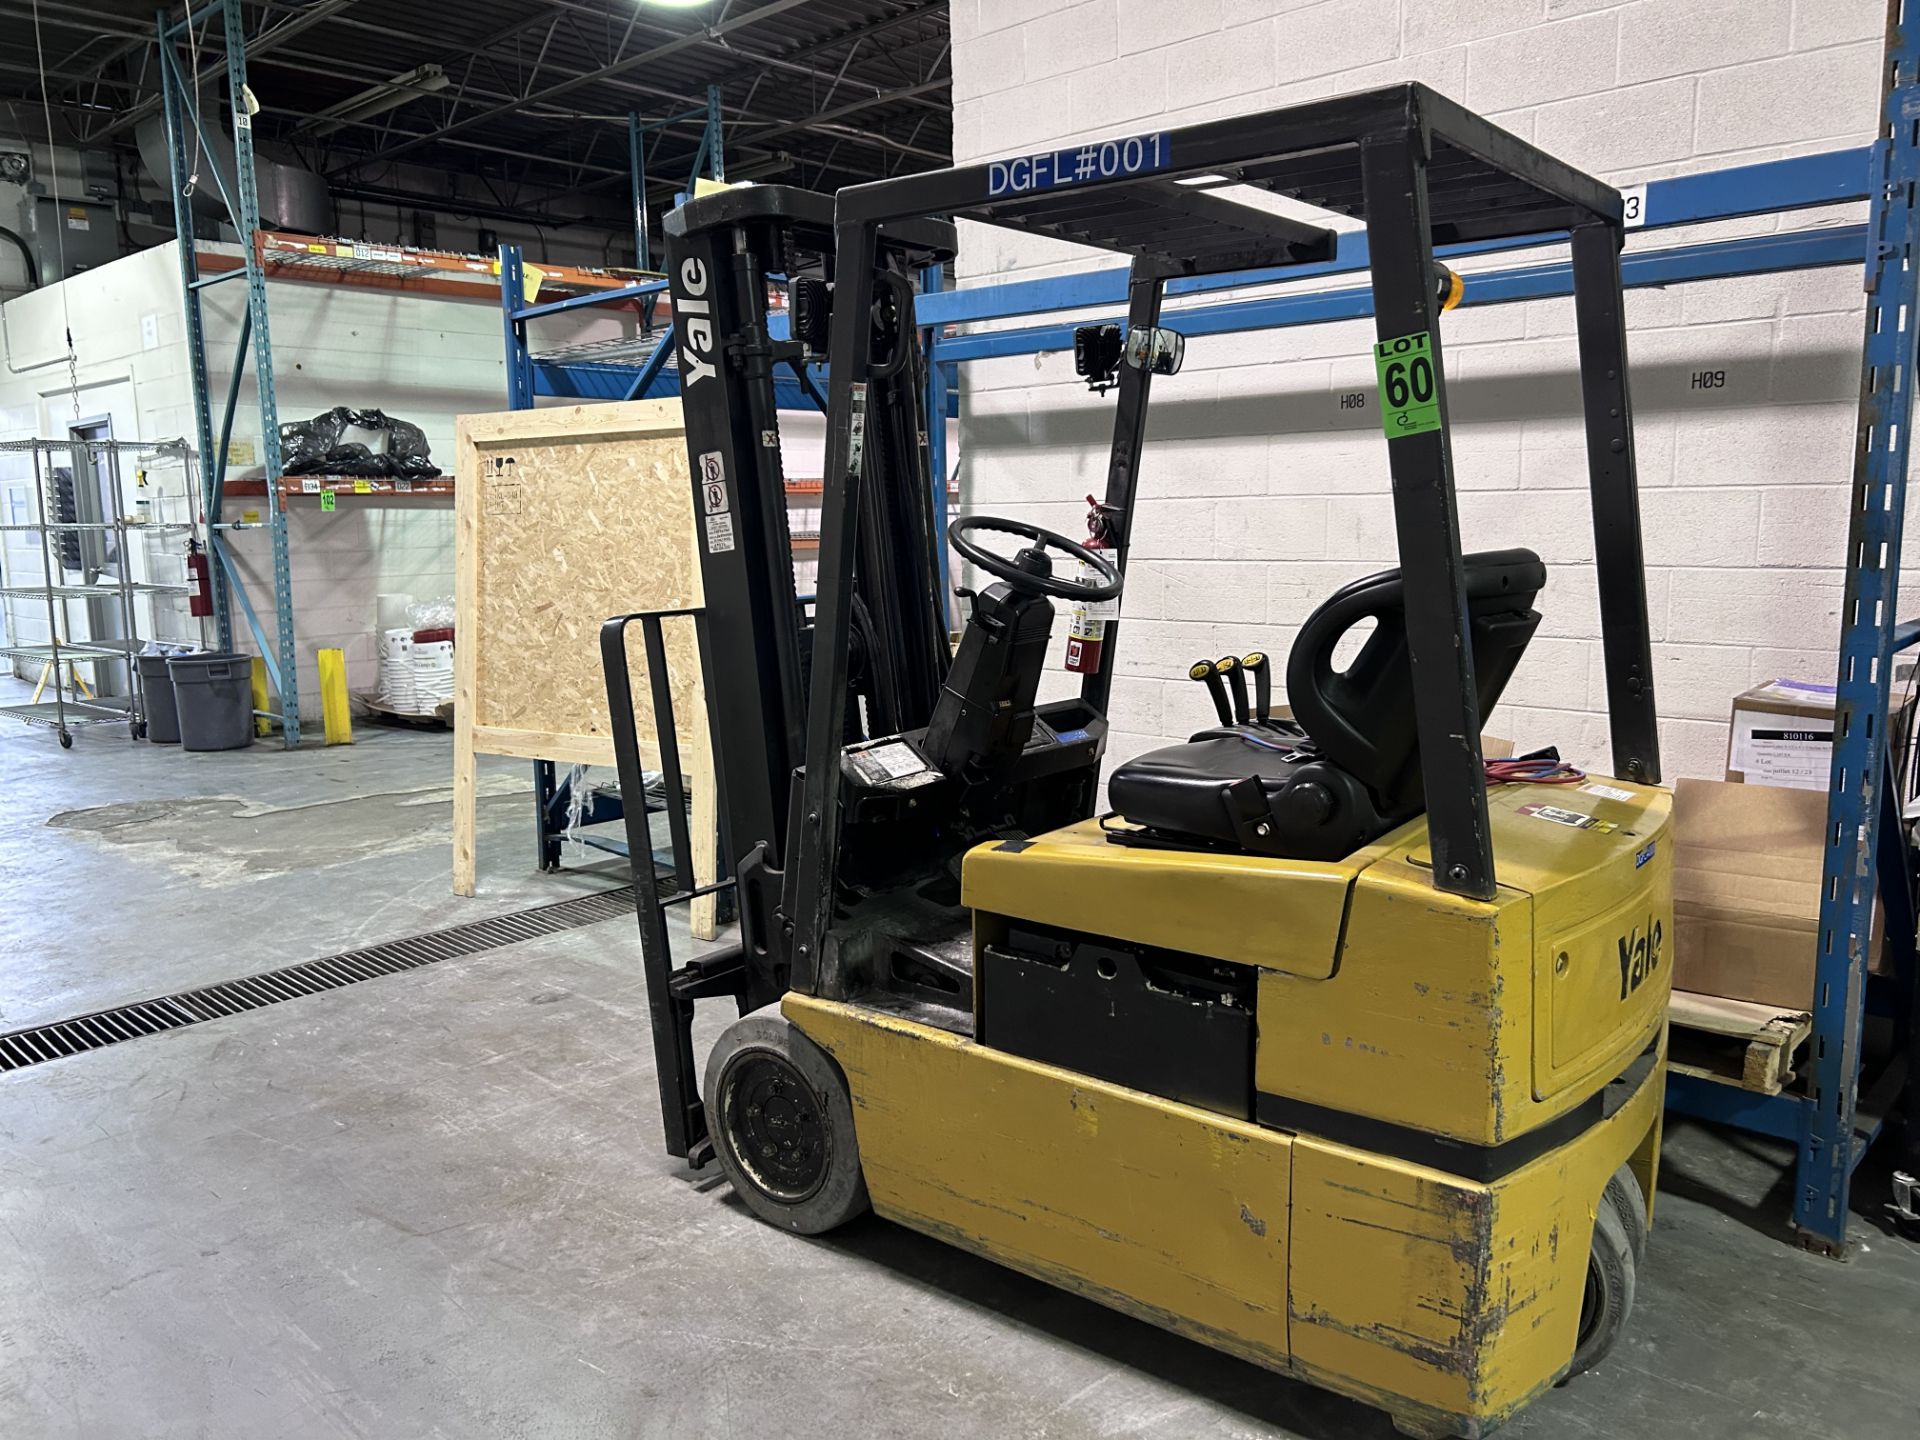 Other assets incl. Plant Utility & Support Equipment, Warehouse Equipment, Tools, Trailer, Offices - Image 27 of 27